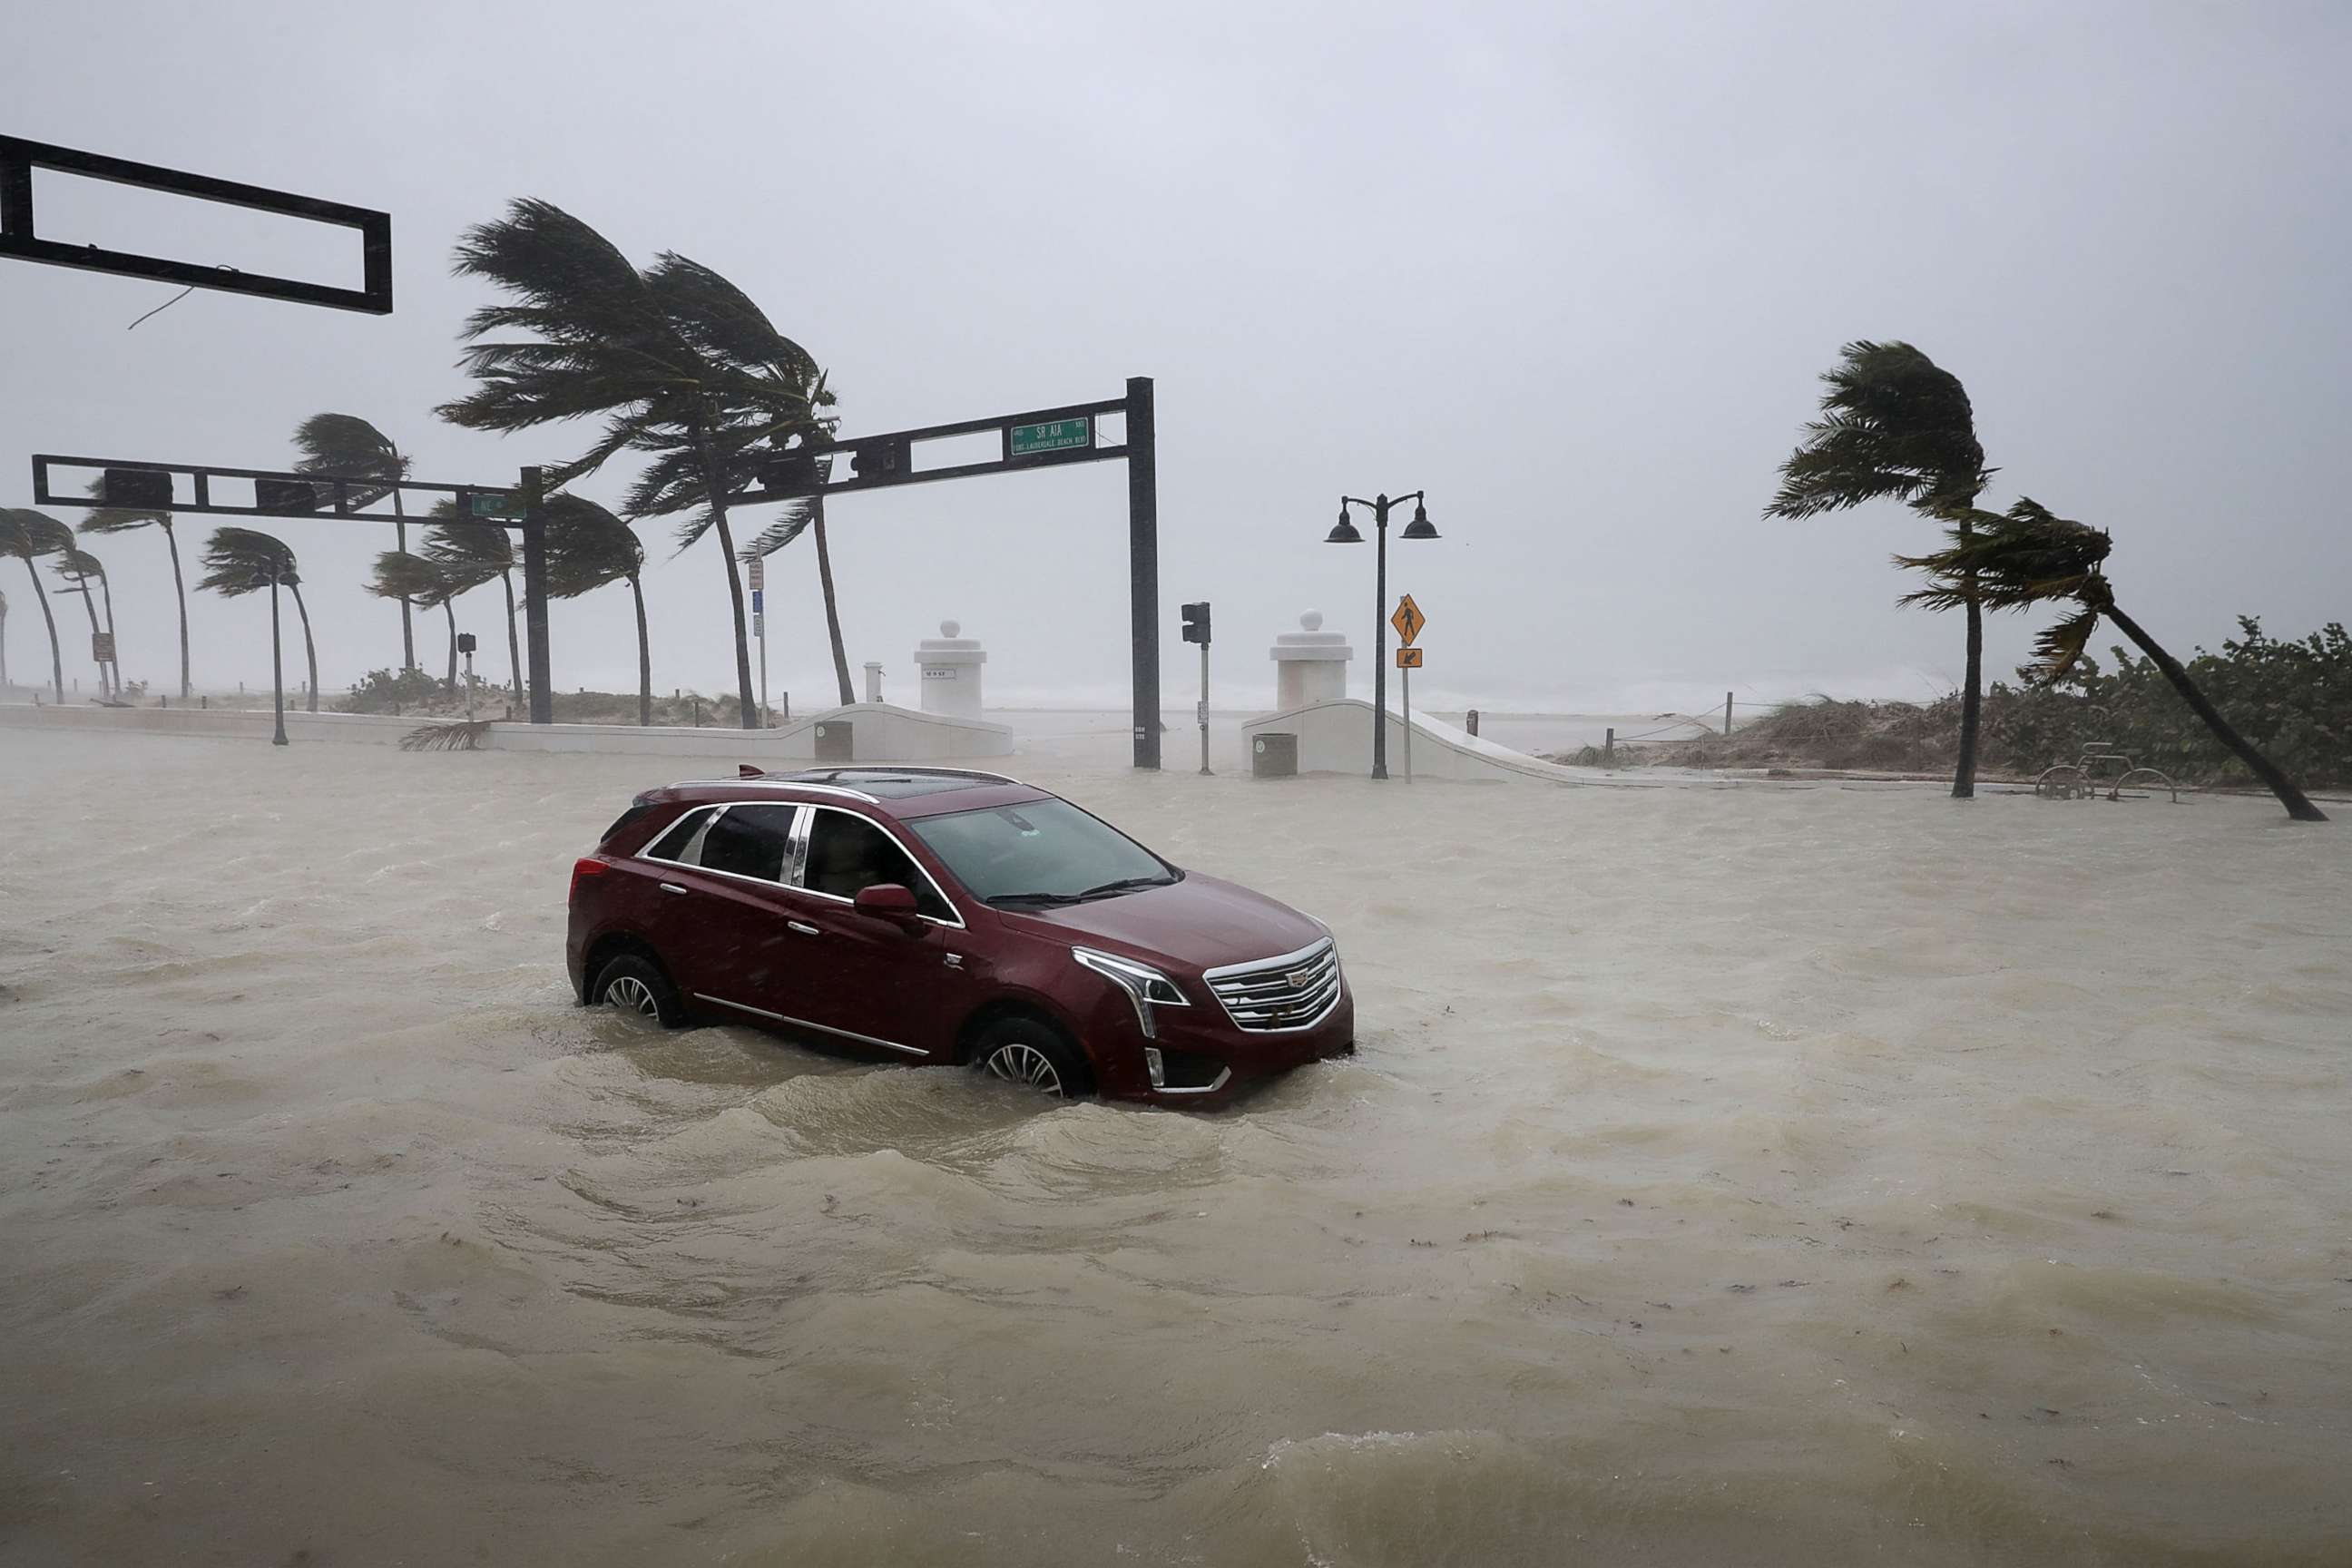 PHOTO: A car sits abandoned in storm surge waters along North Fort Lauderdale Beach Boulevard as Hurricane Irma hits the southern part of the state Sept. 10, 2017 in Fort Lauderdale, Fla.